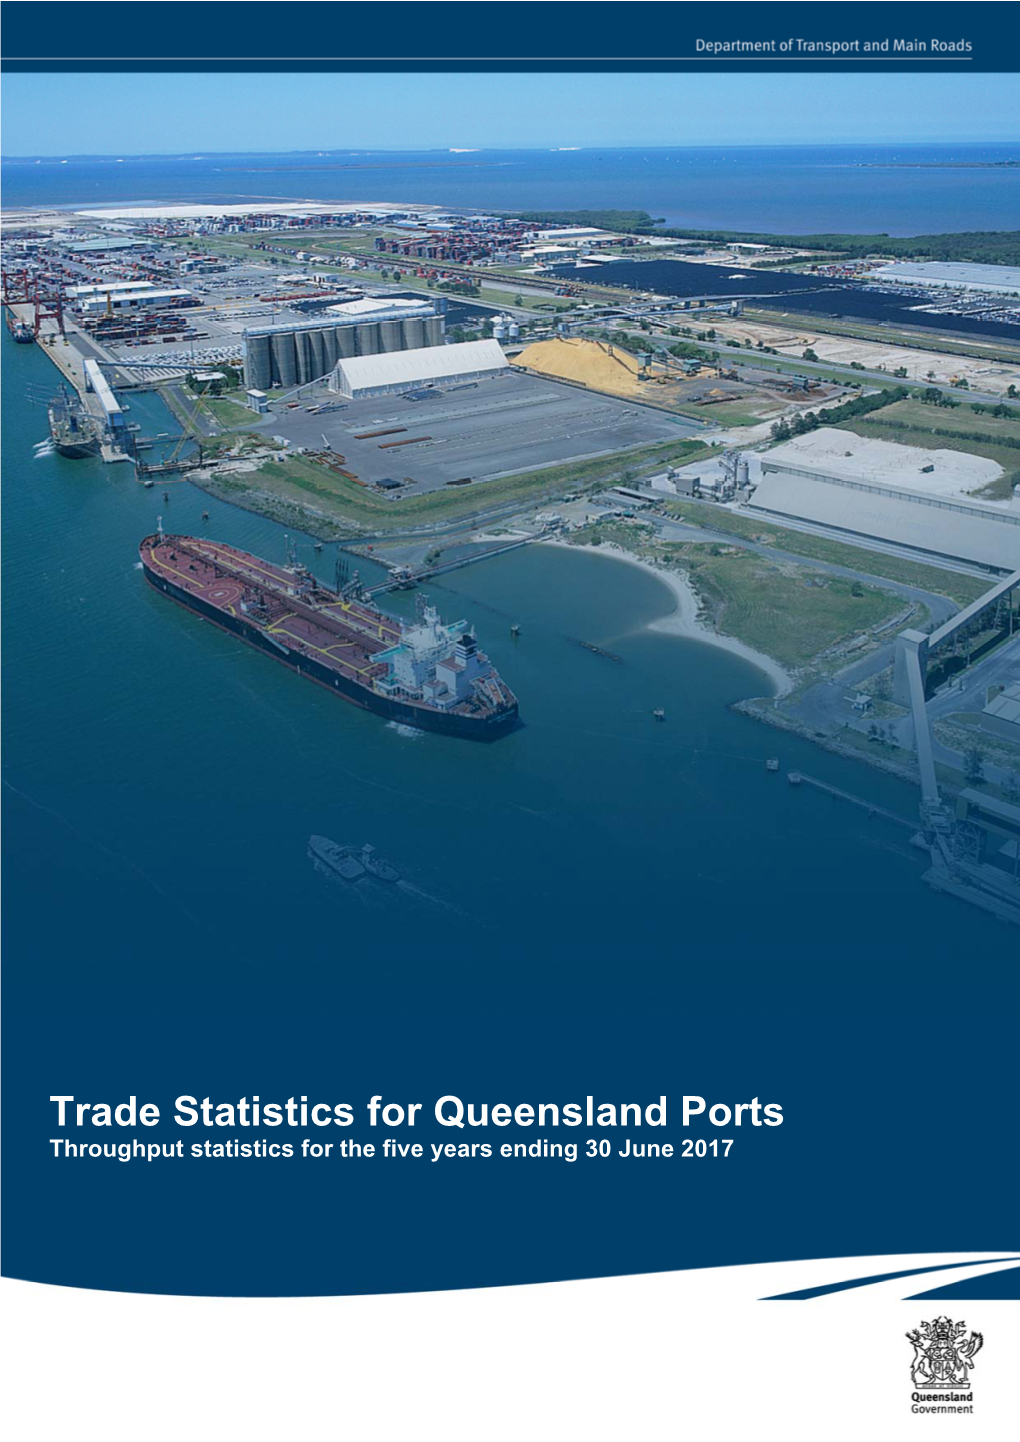 Trade Statistics for Queensland Ports Throughput Statistics for the Five Years Ending 30 June 2017